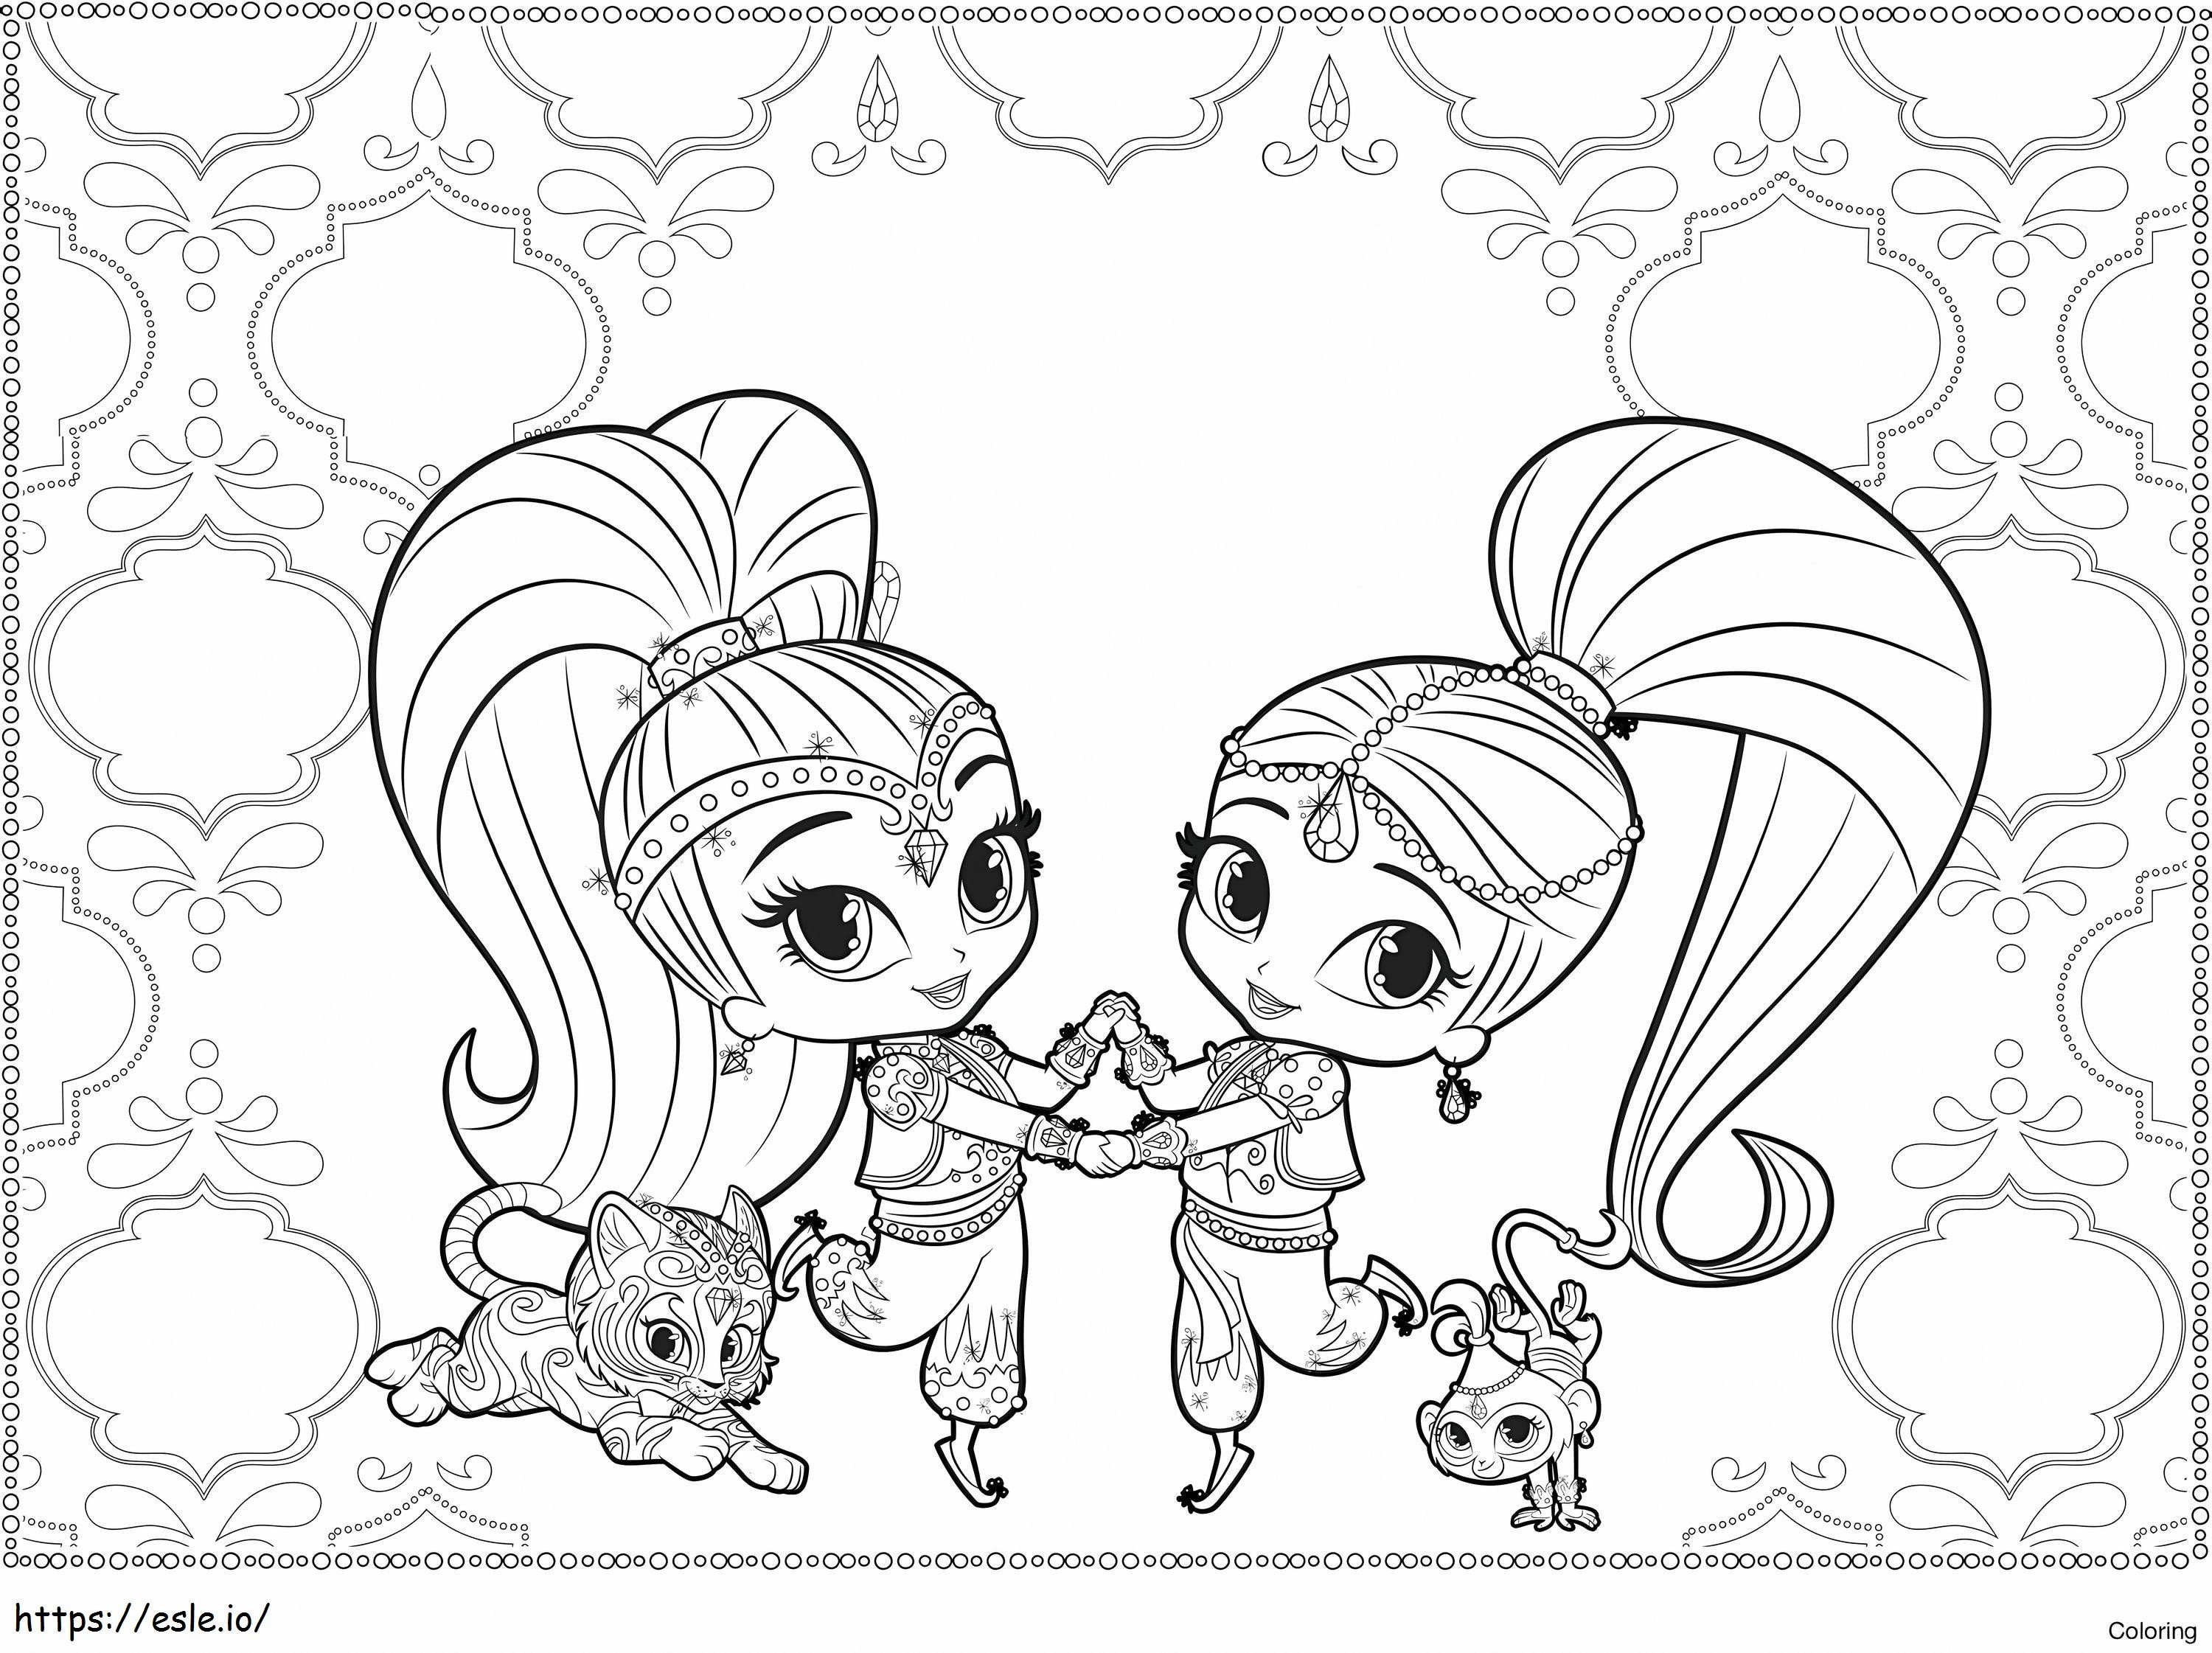 1571704955 Free Shimmer And Shine Yeni Fresh Shimmer And Shine of Free Shimmer And Shine boyama